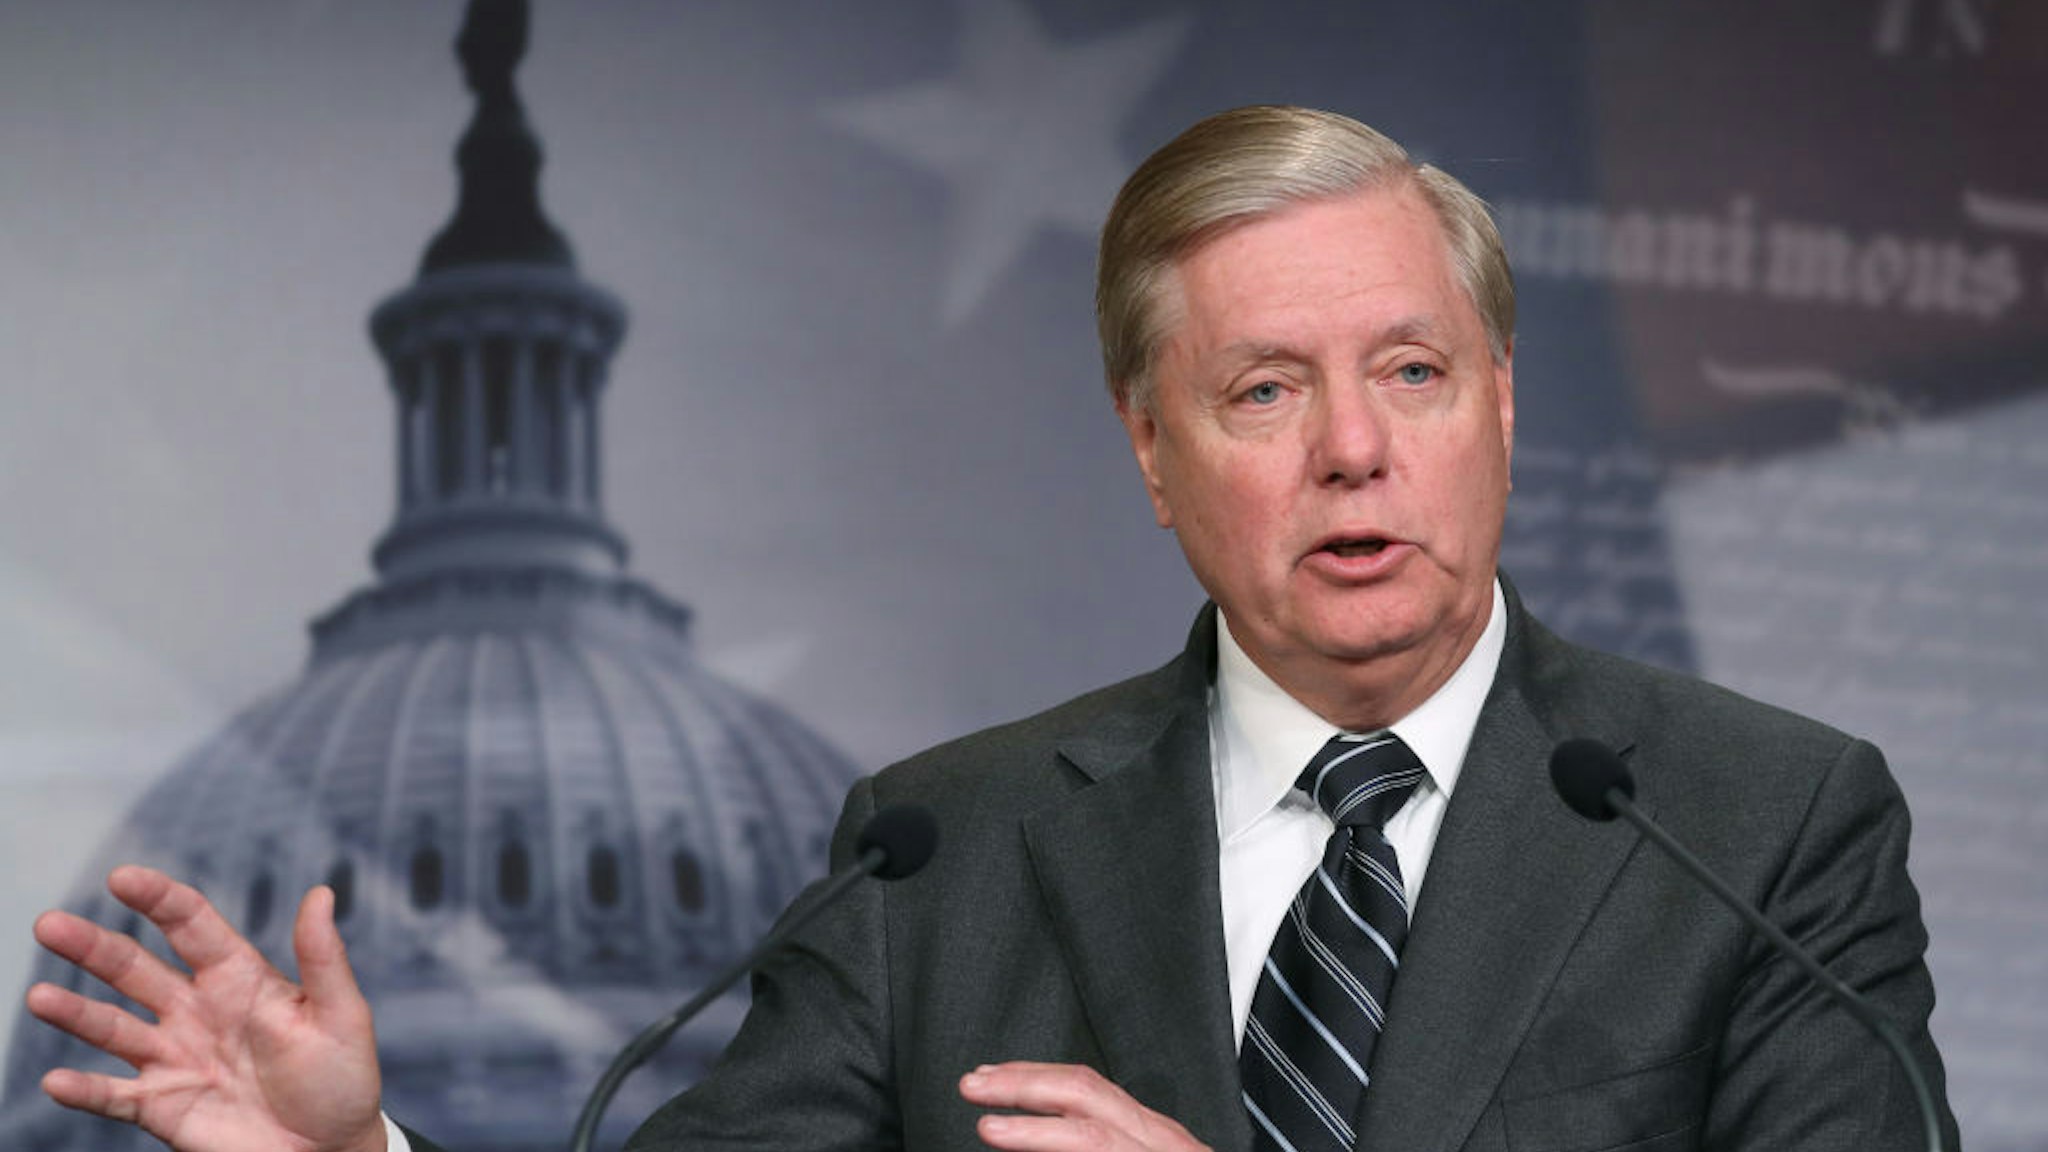 Senate Judiciary Committee Chairman Lindsey Graham (R-SC), speaks after introducing a resolution condemning House Impeachment inquiry against President Donald Trump, at the U.S. Capitol on October 24, 2019 in Washington, DC.